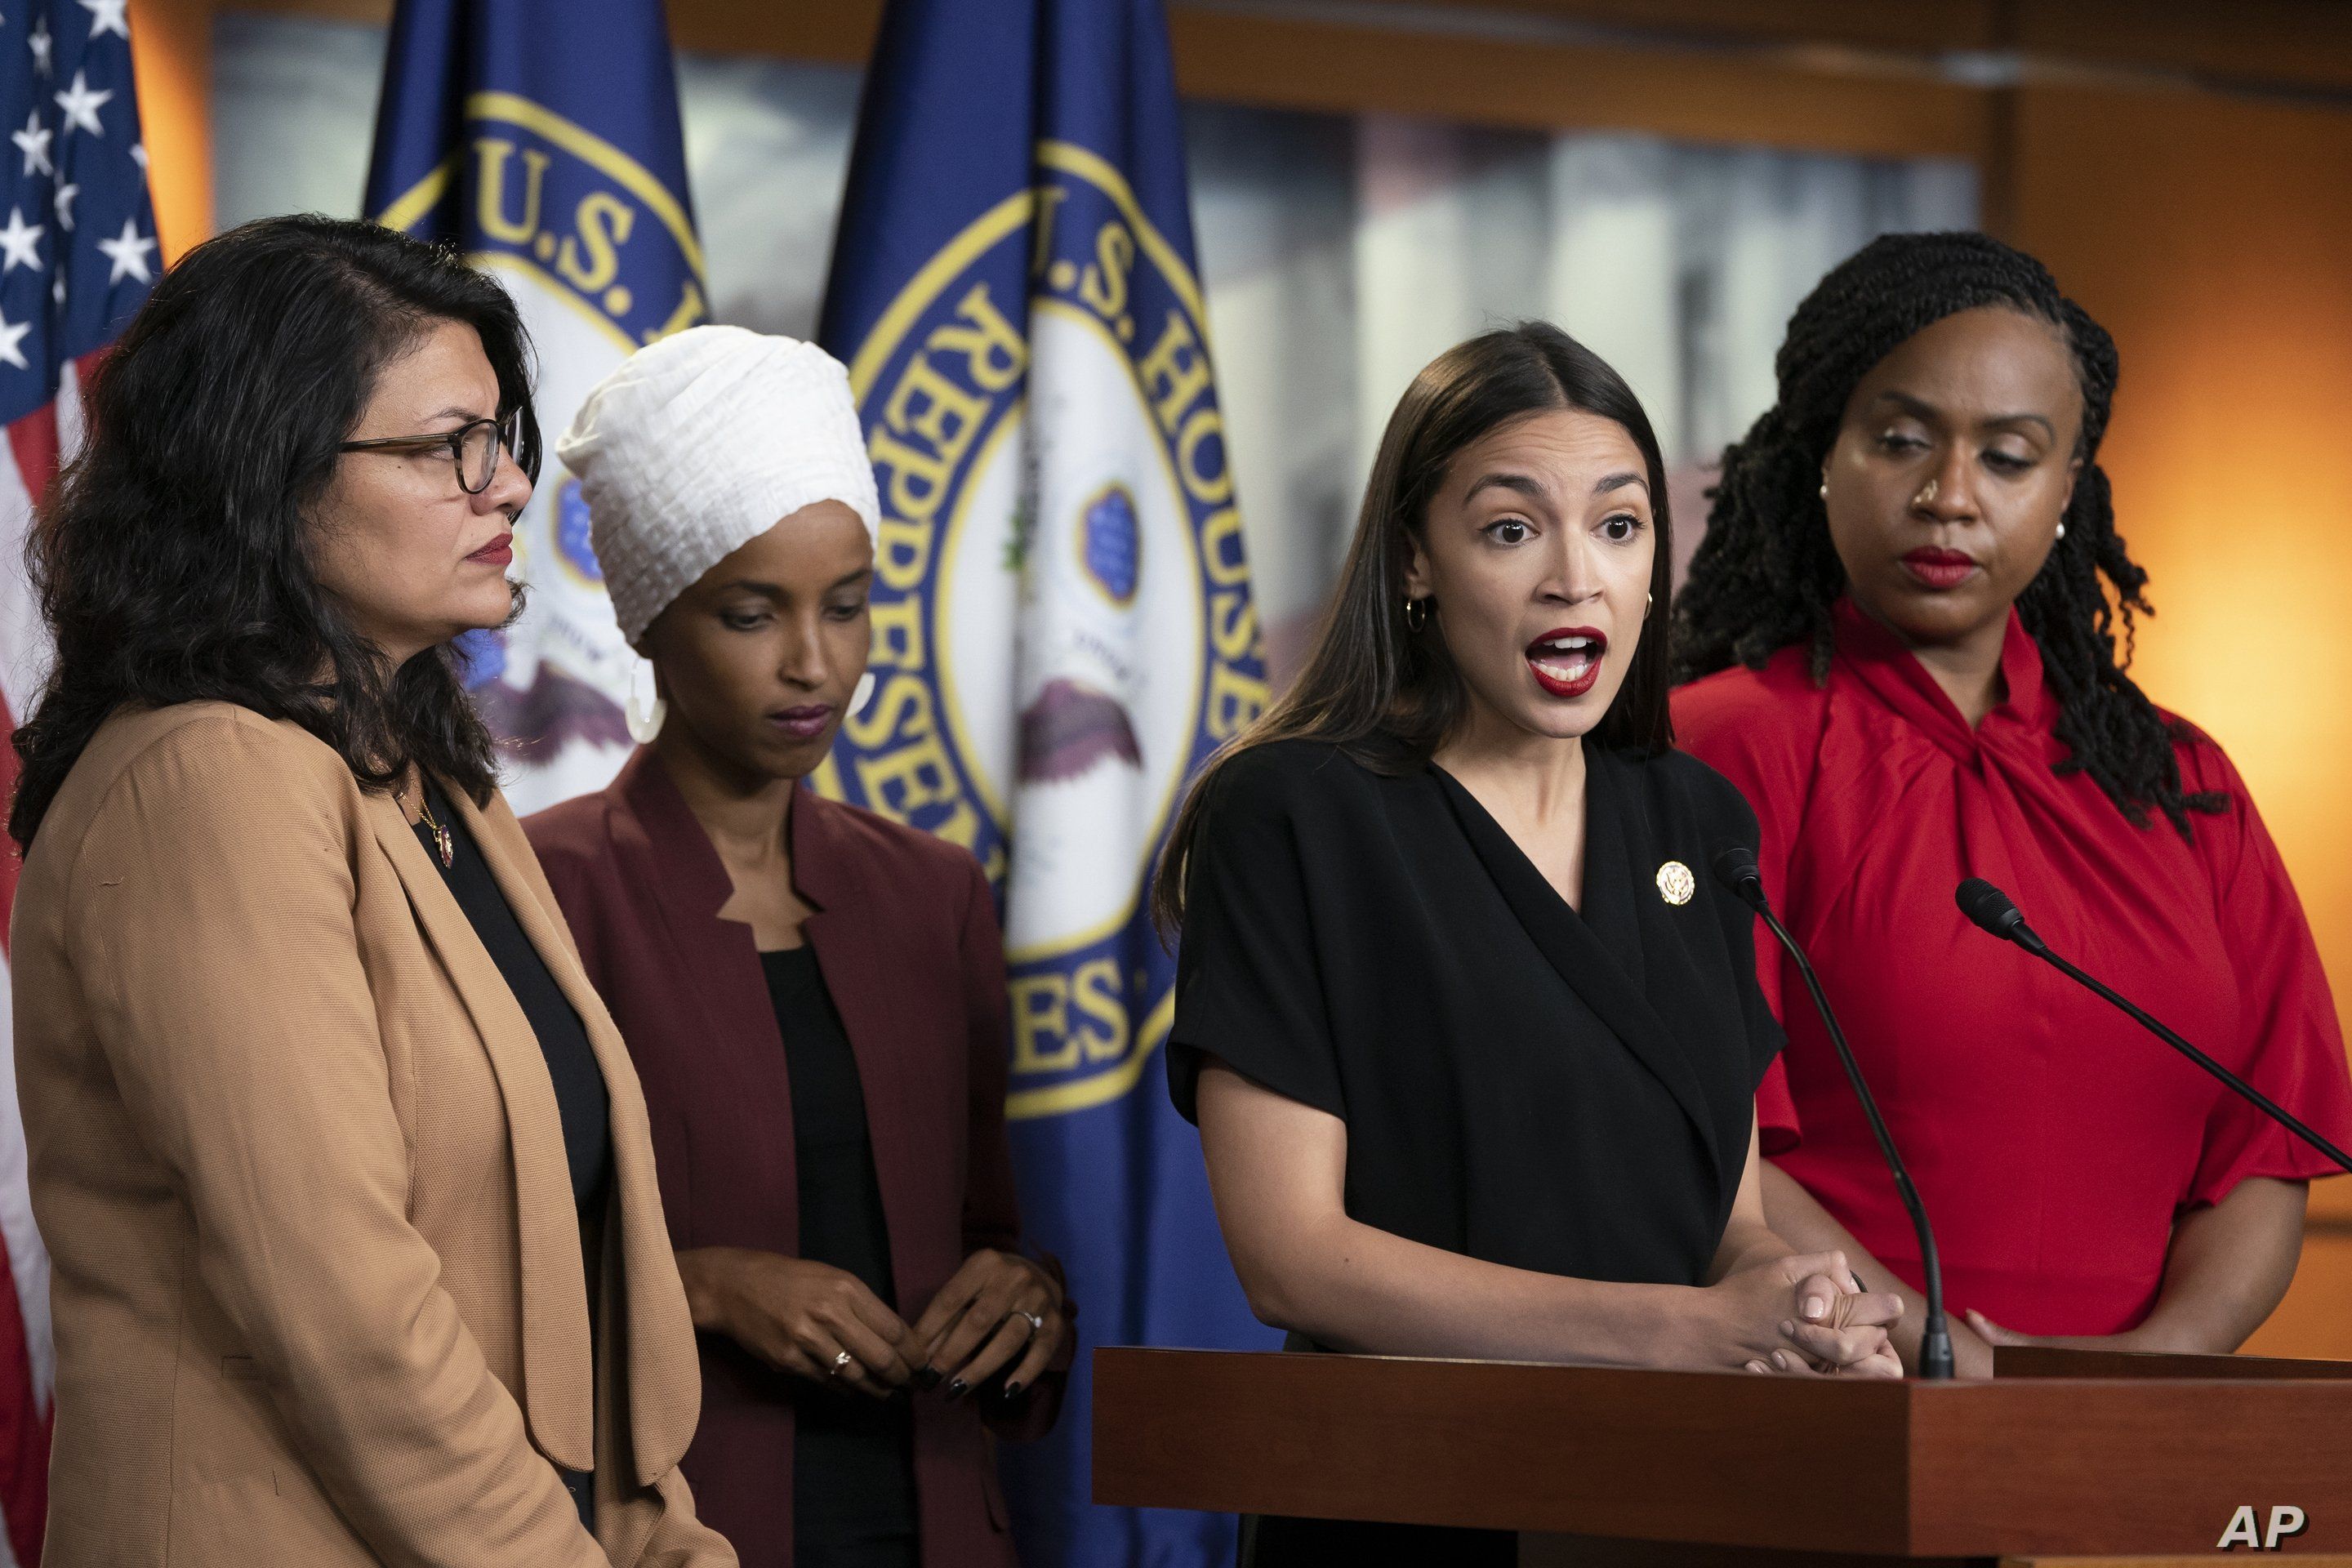 U.S. Rep. Alexandria Ocasio-Cortez, D-N.Y., speaks as, from left, Rep. Rashida Tlaib, D-Mich., Rep. Ilhan Omar, D-Minn., and Rep. Ayanna Pressley, D-Mass., listen during a news conference at the Capitol in Washington, Monday, July 15, 2019…